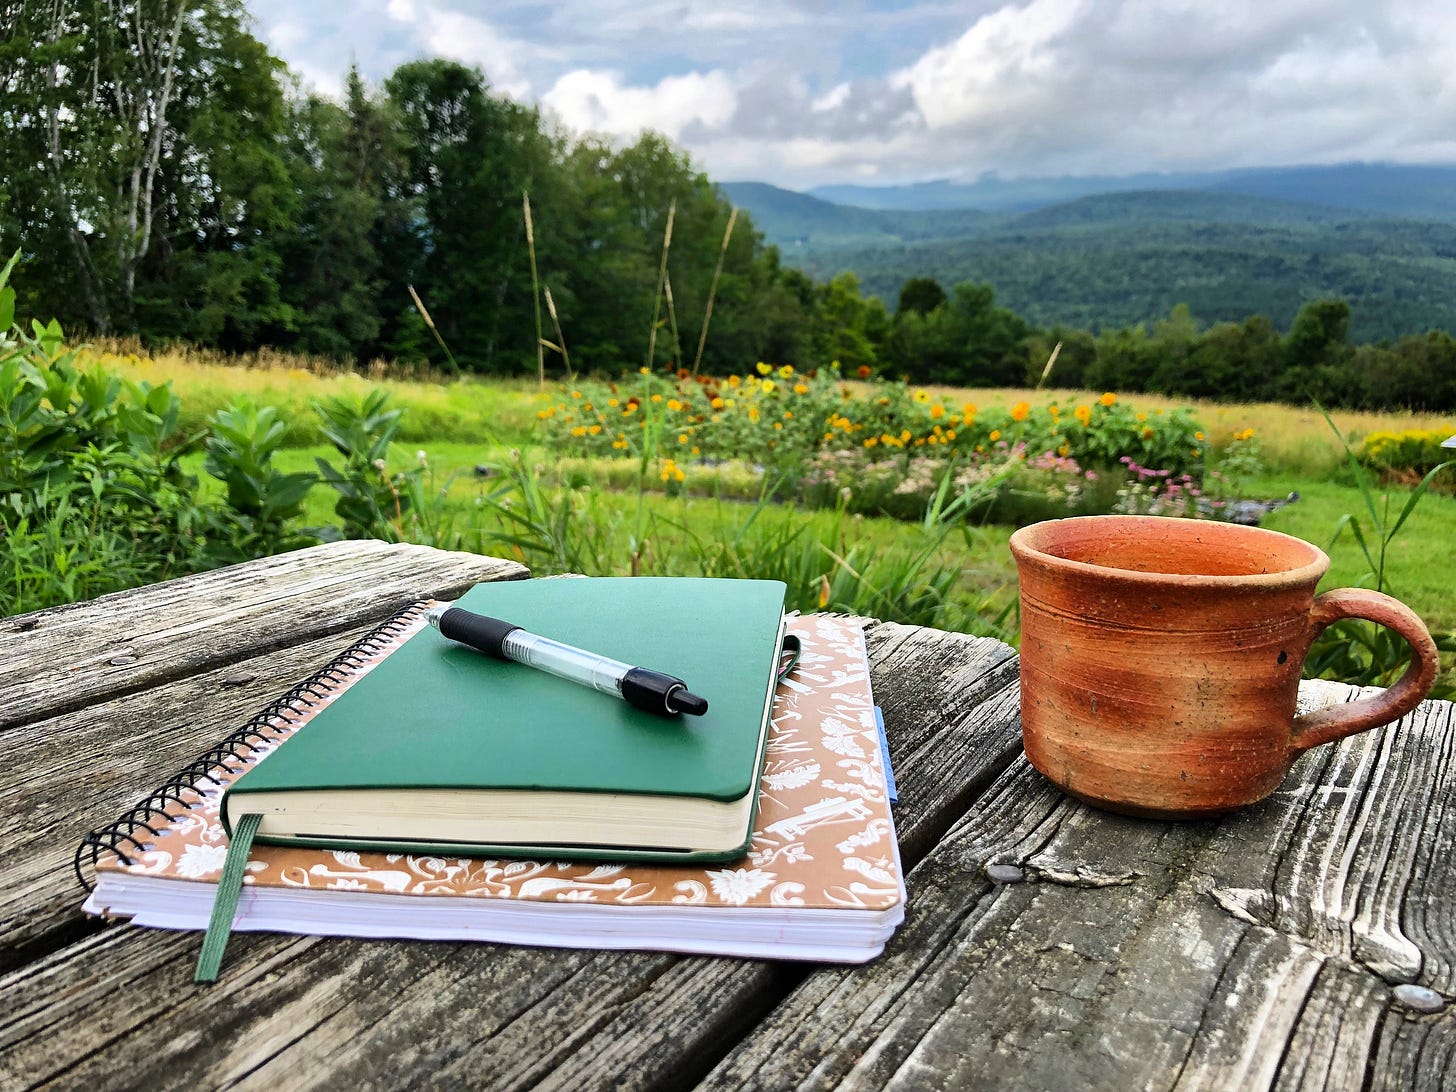 a pen, green journal, and brown notebook stacked on top of each other on a weathered picnic table, with a clay colored mug next to them.  In the background is a sunflower garden and beyond that are forested foothills rising up to a cloudy ski.